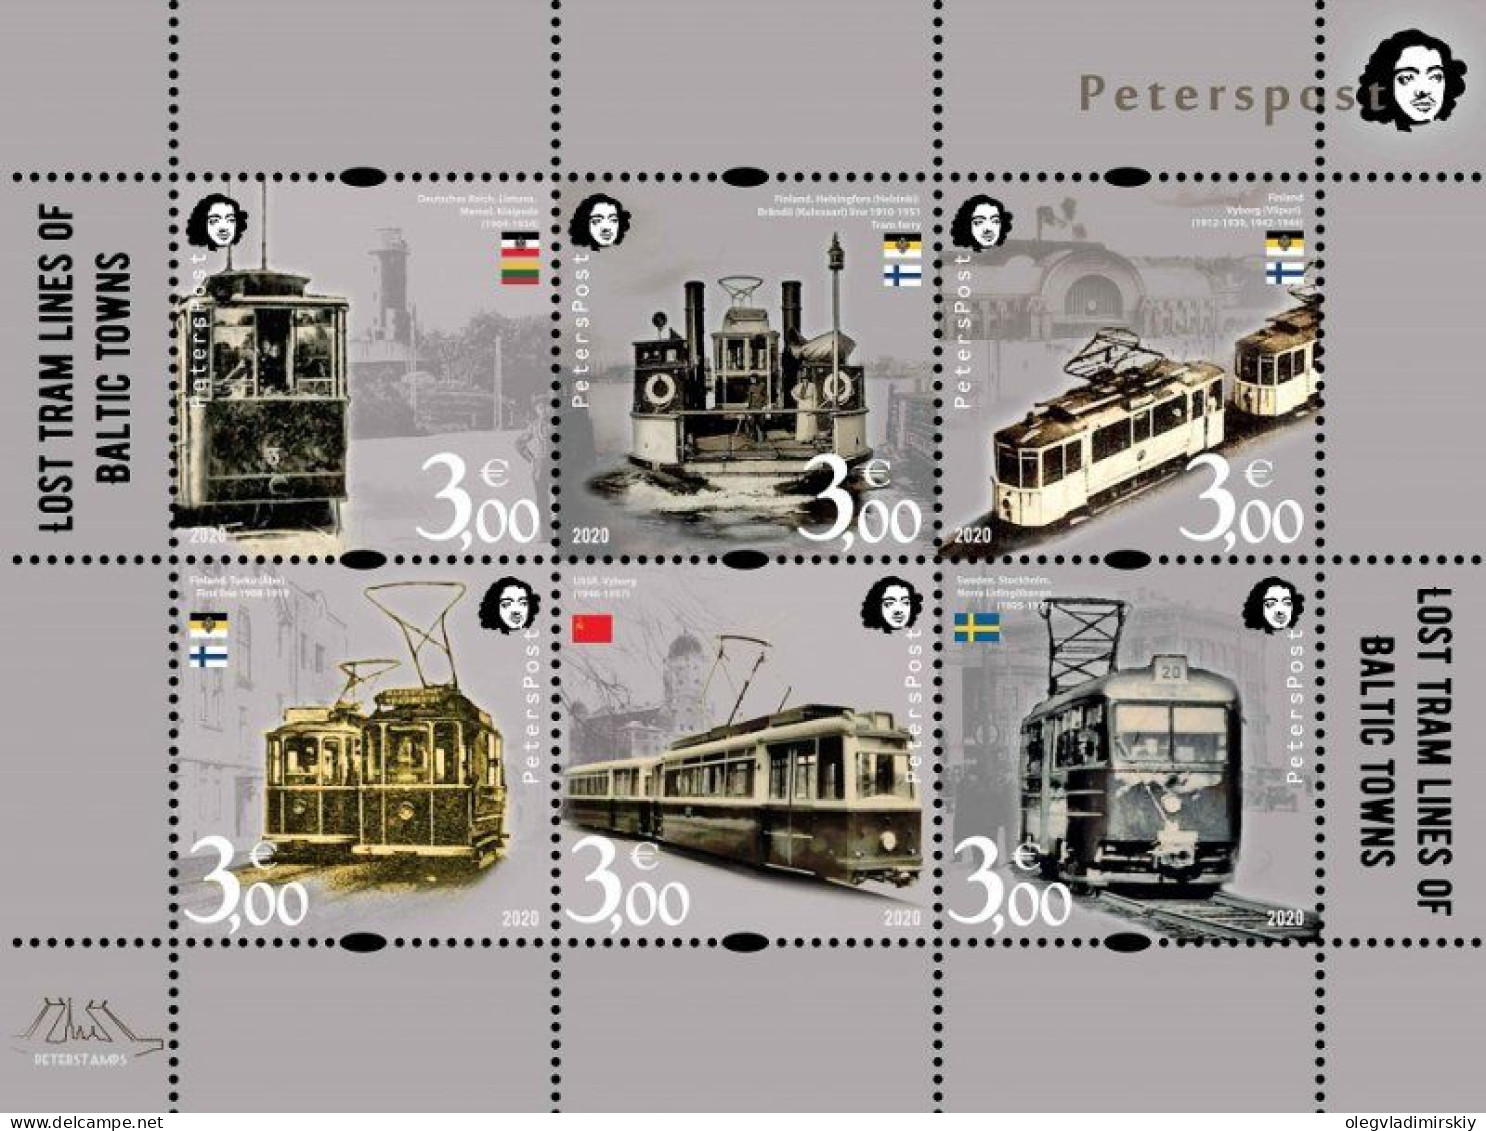 Finland 2020 Lost Tram Lines Of Baltic Towns Lighthouse Railway Station Ship Peterspost Set Of 6 Stamps In Block MNH - Tram